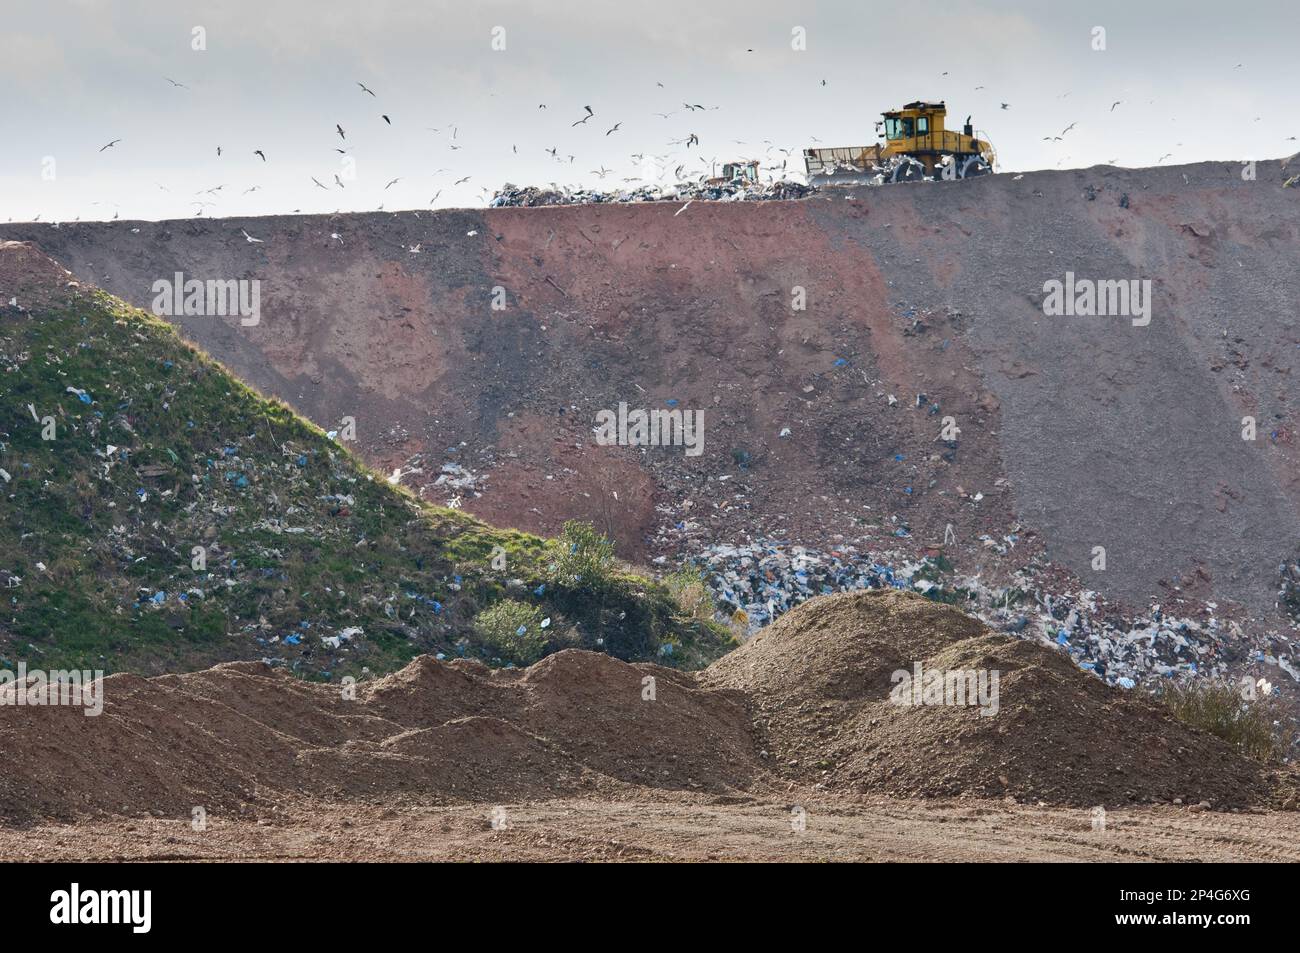 Compaction machines working on council rubbish tip, near Ellesmere, Cheshire, England, United Kingdom Stock Photo